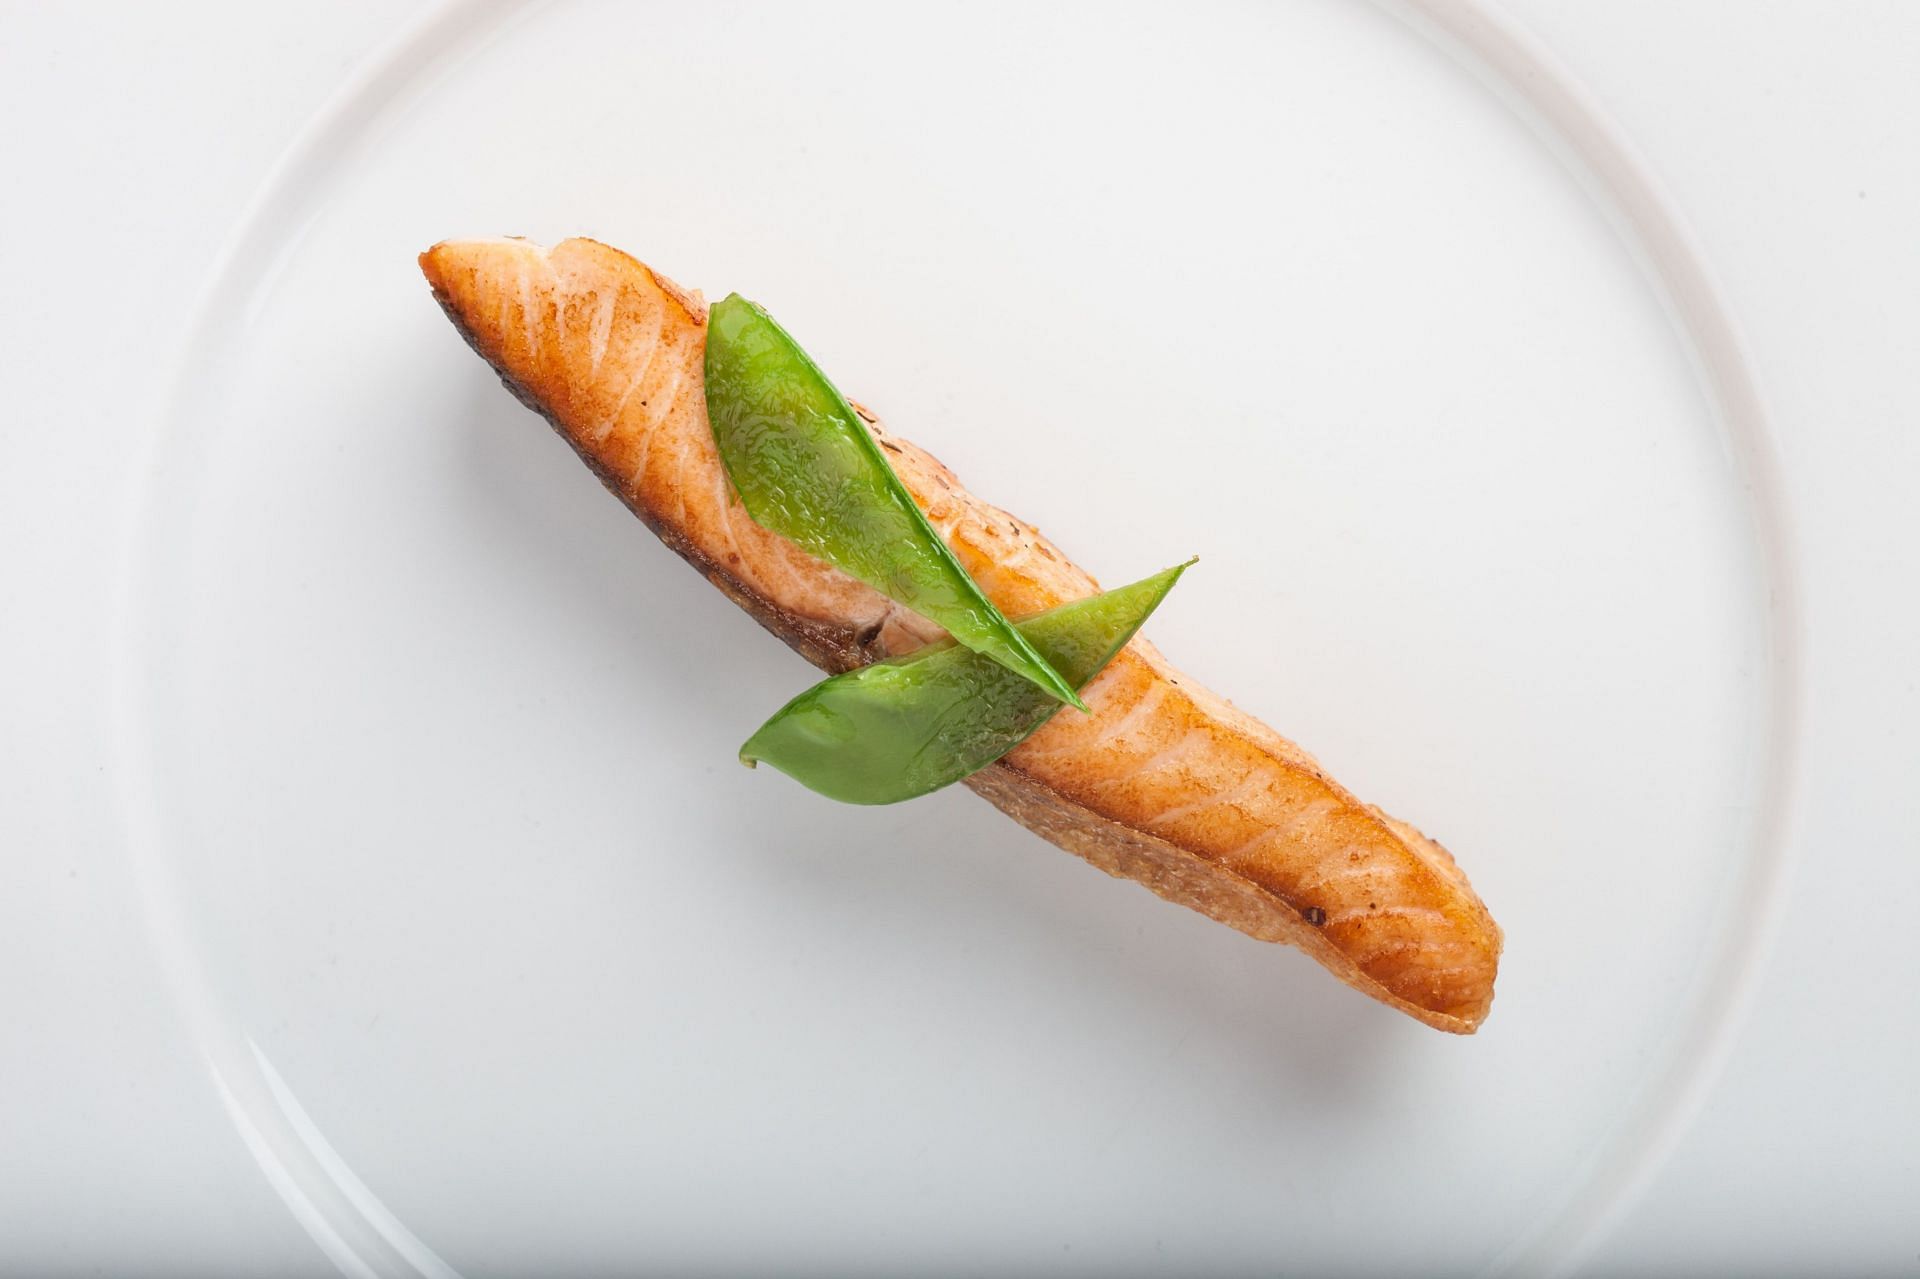 Fish like salmon is a great option for those on a low fiber diet. (Image via Pexels/Robert Bogdan)